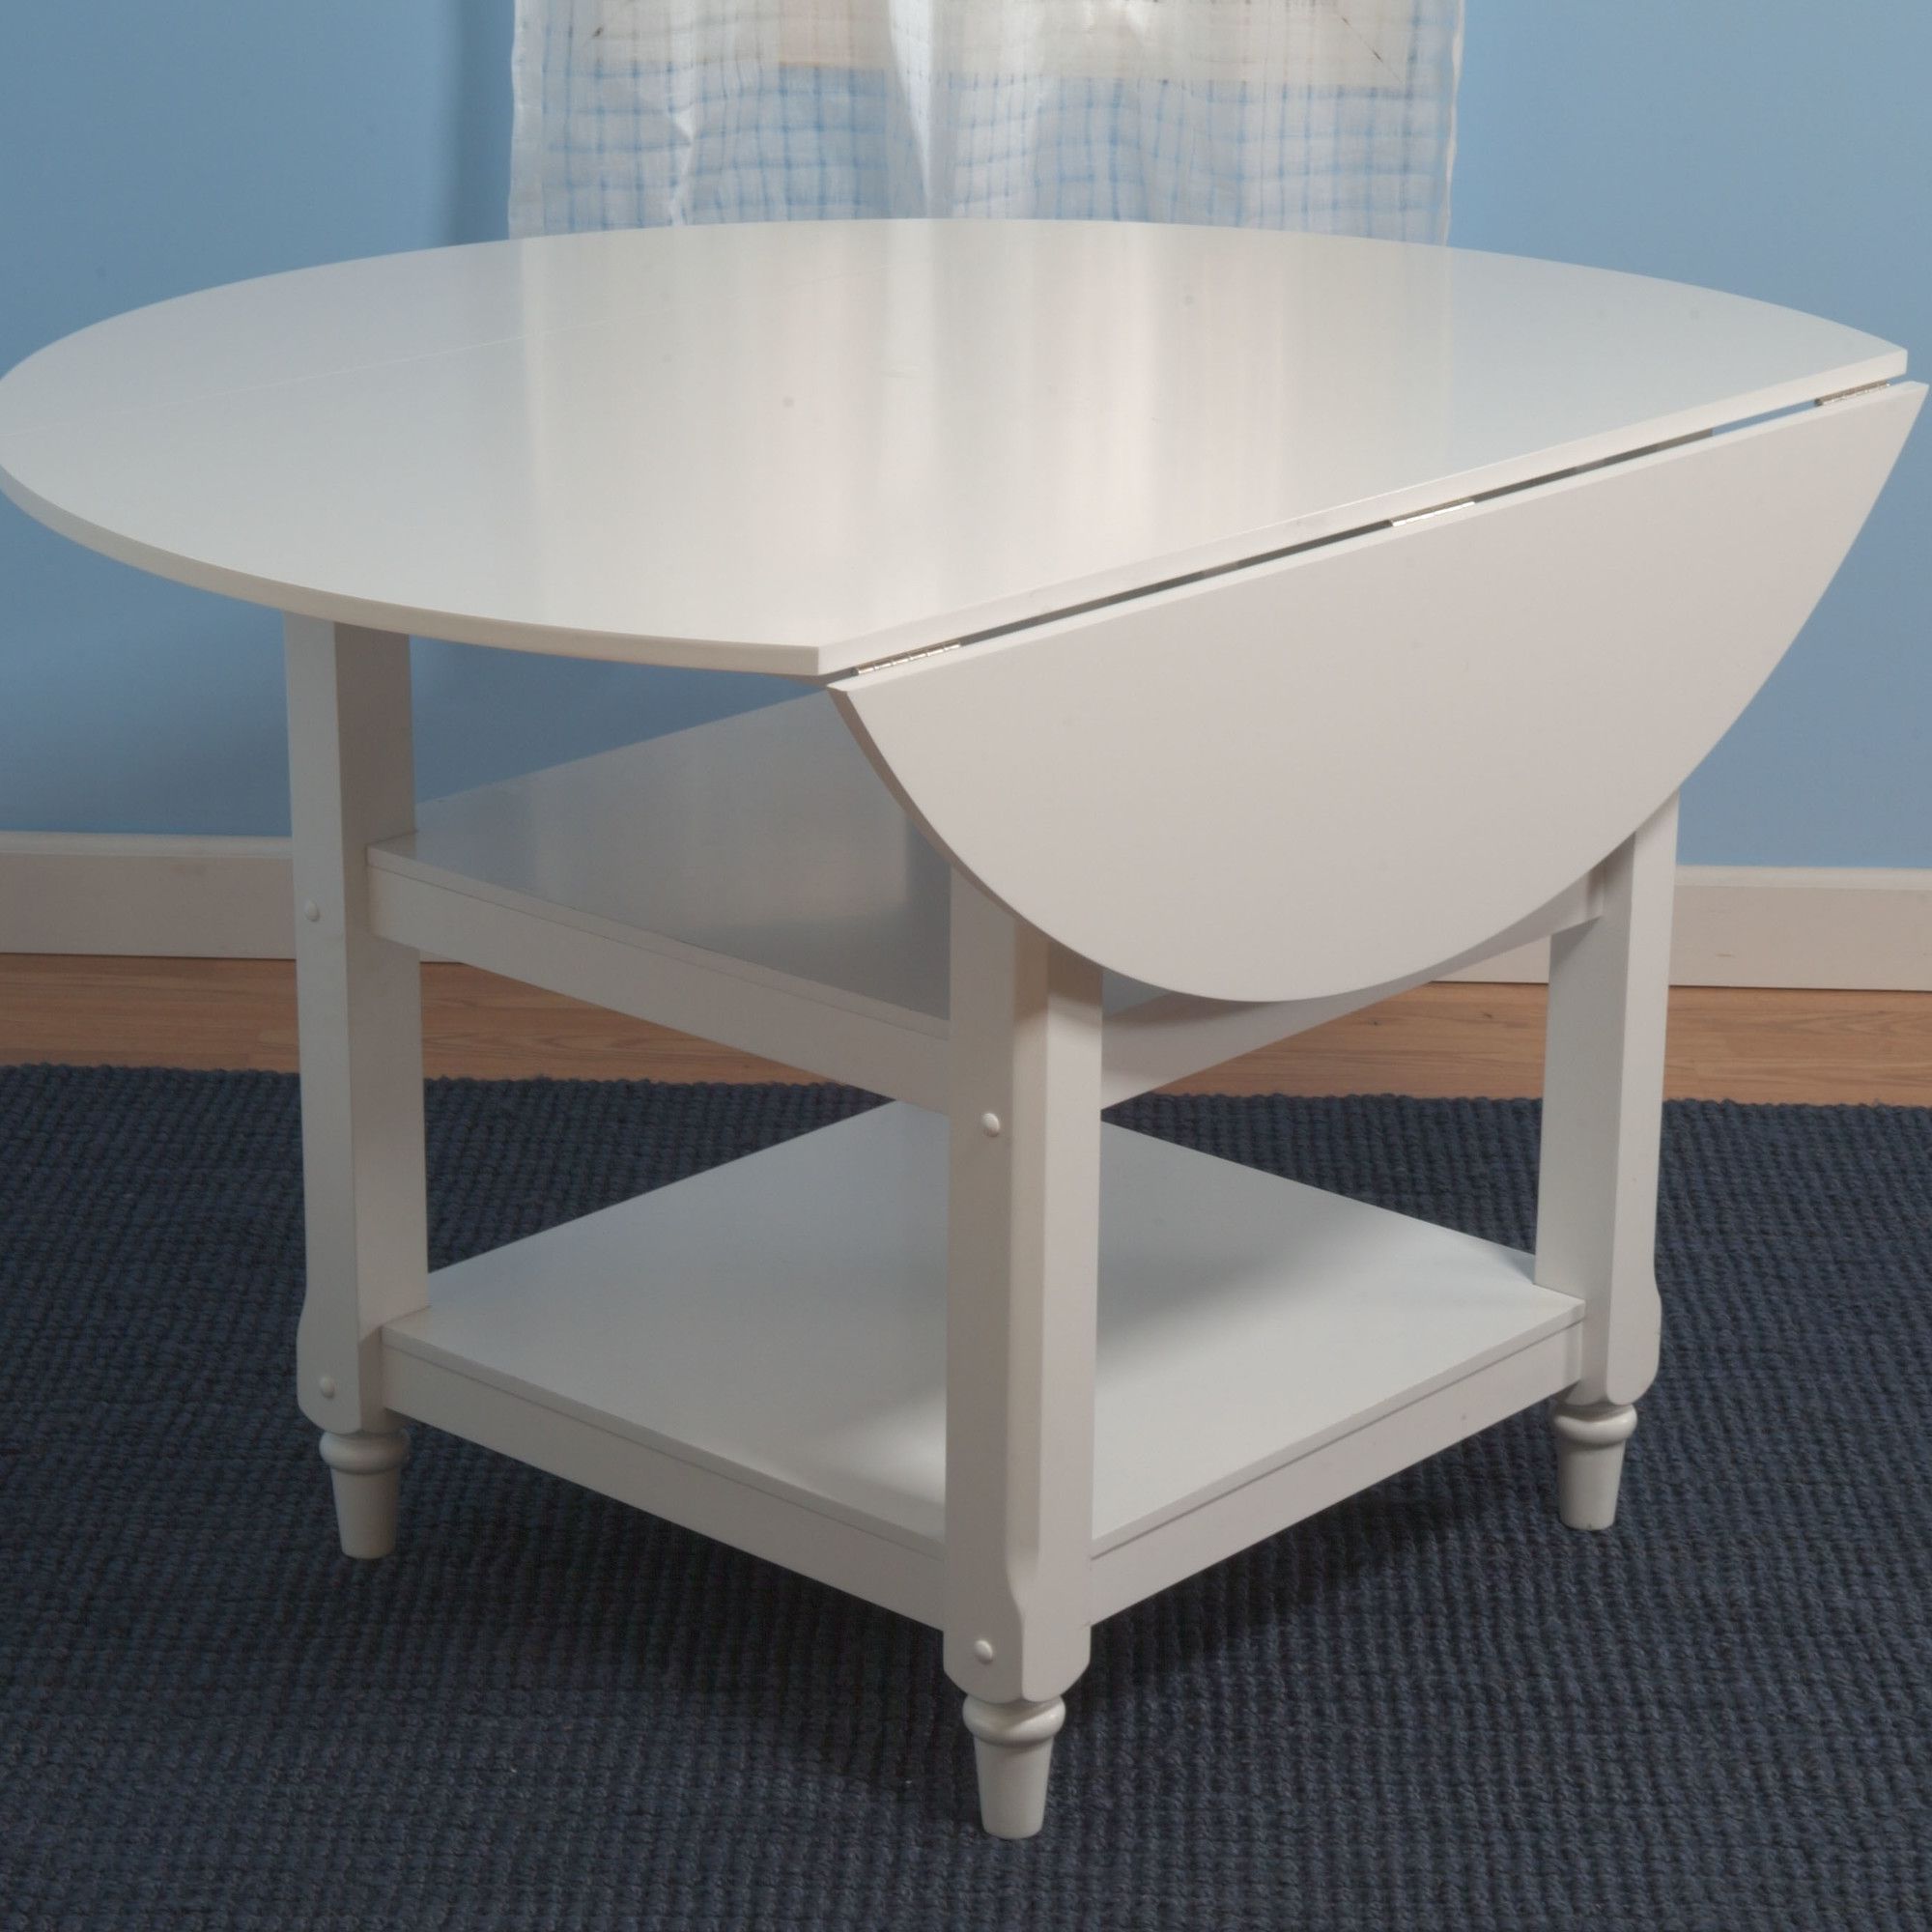 Mahogany Shayne Drop Leaf Kitchen Tables In Preferred Bristol Point Drop Leaf Dining Table In  (View 8 of 25)